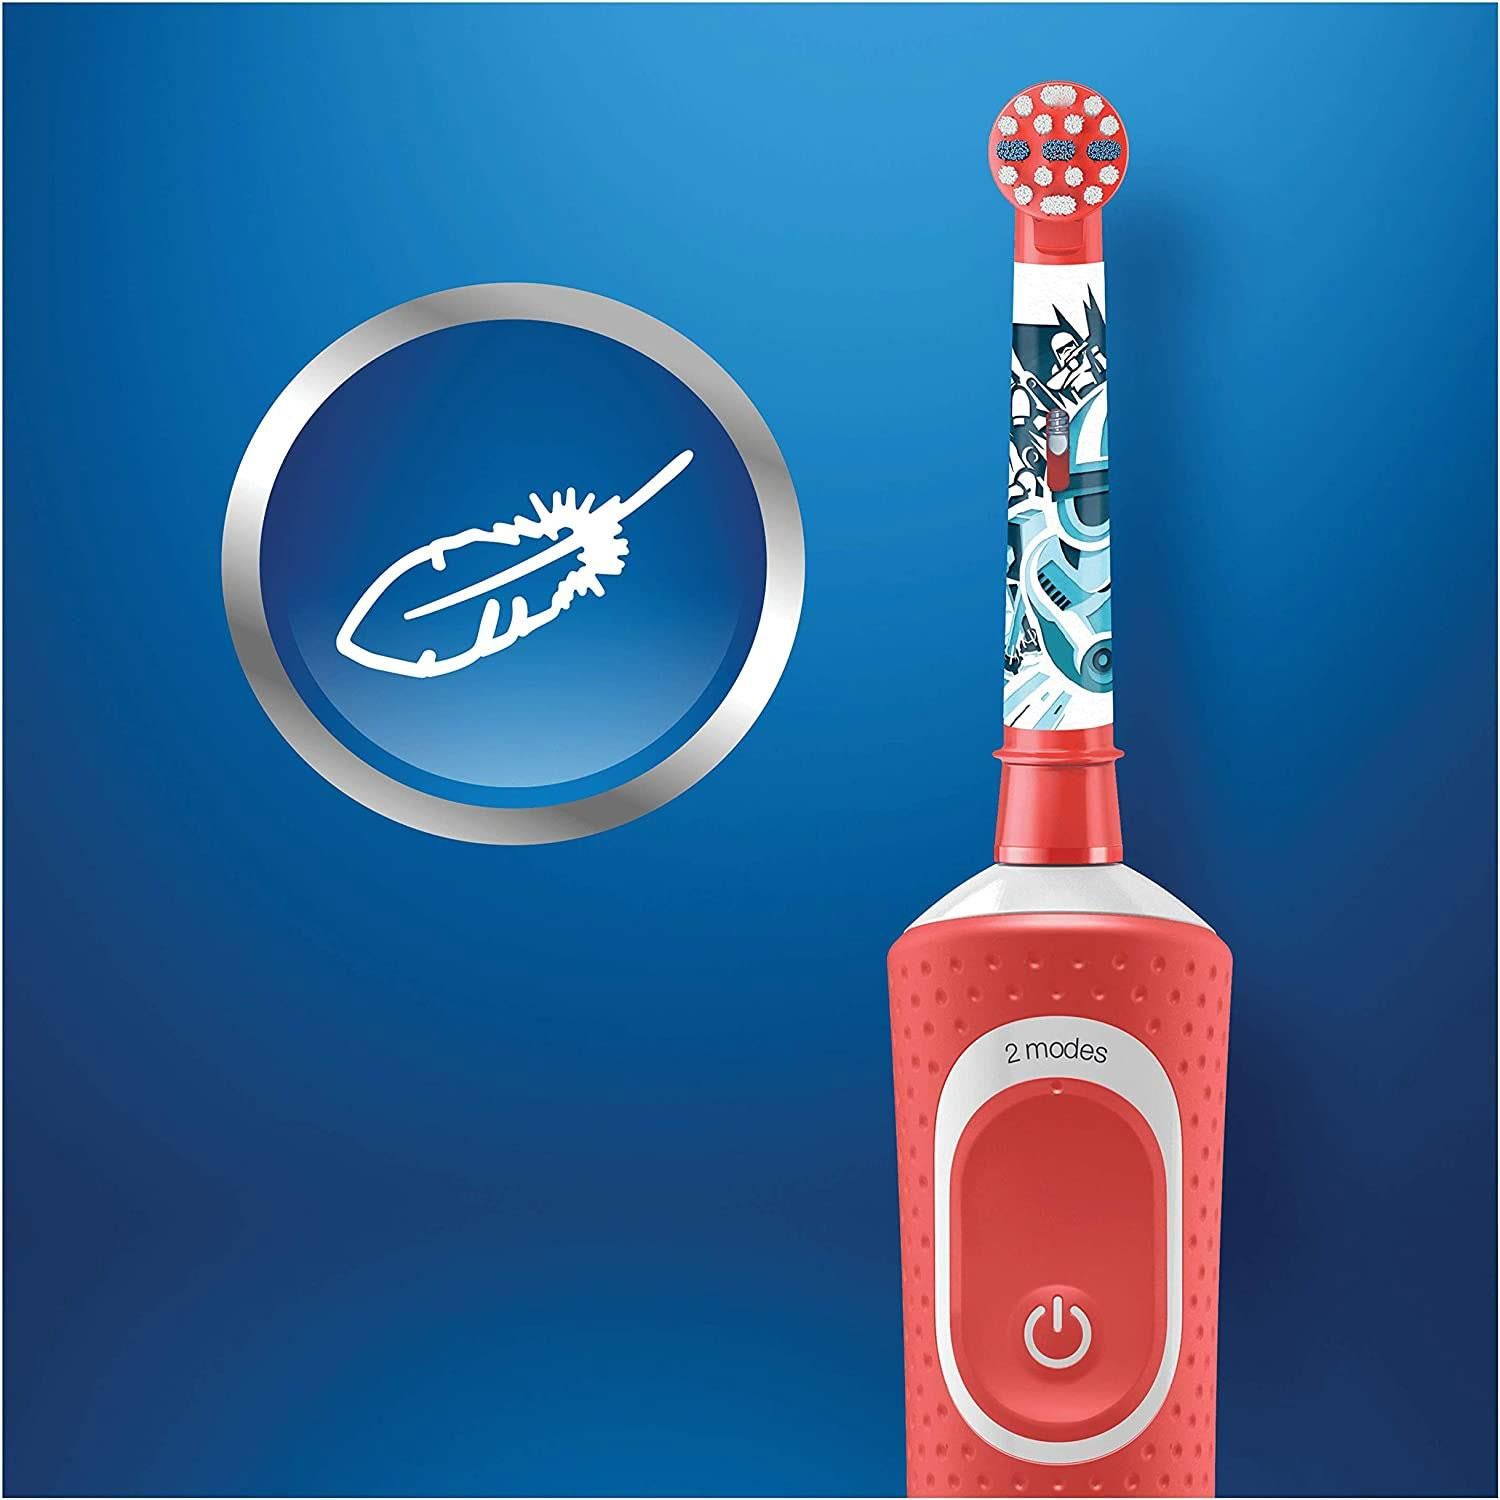 Oral-B KIDS 3+ Star Wars Electric Toothbrush for Kids with Travel Case.  The Oral-B Kids electric toothbrush for ages 3+ gives kids the fun of Star Wars with the gentle, effective clean of a dentist-recommended Oral-B toothbrush. With a unique, kid-friendly sensitive mode, this brush gently cleans kids' teeth. It removes more plaque than a regular manual toothbrush. Four Star Wars themed stickers are included to customize the handle. 

Features: 

  Specifically designed to be gentle for kids
  Round brush head sized for small mouths
  Extra-soft bristles are gentle on tender gums
  Suitable for ages 3+
  Customize the brush handle with 4 Star Wars themed stickers
  Works with the Disney Magic Timer App by Oral-B
  Rechargeable battery for an 8-day charge
  Encourages brushing for 2 minutes with a built-in-timer

The Box contains: 1x Electric toothbrush, 4x stickers for the body of the brush, 1x replacement stages powerhead, 1x travel case with motif, 1x charging.